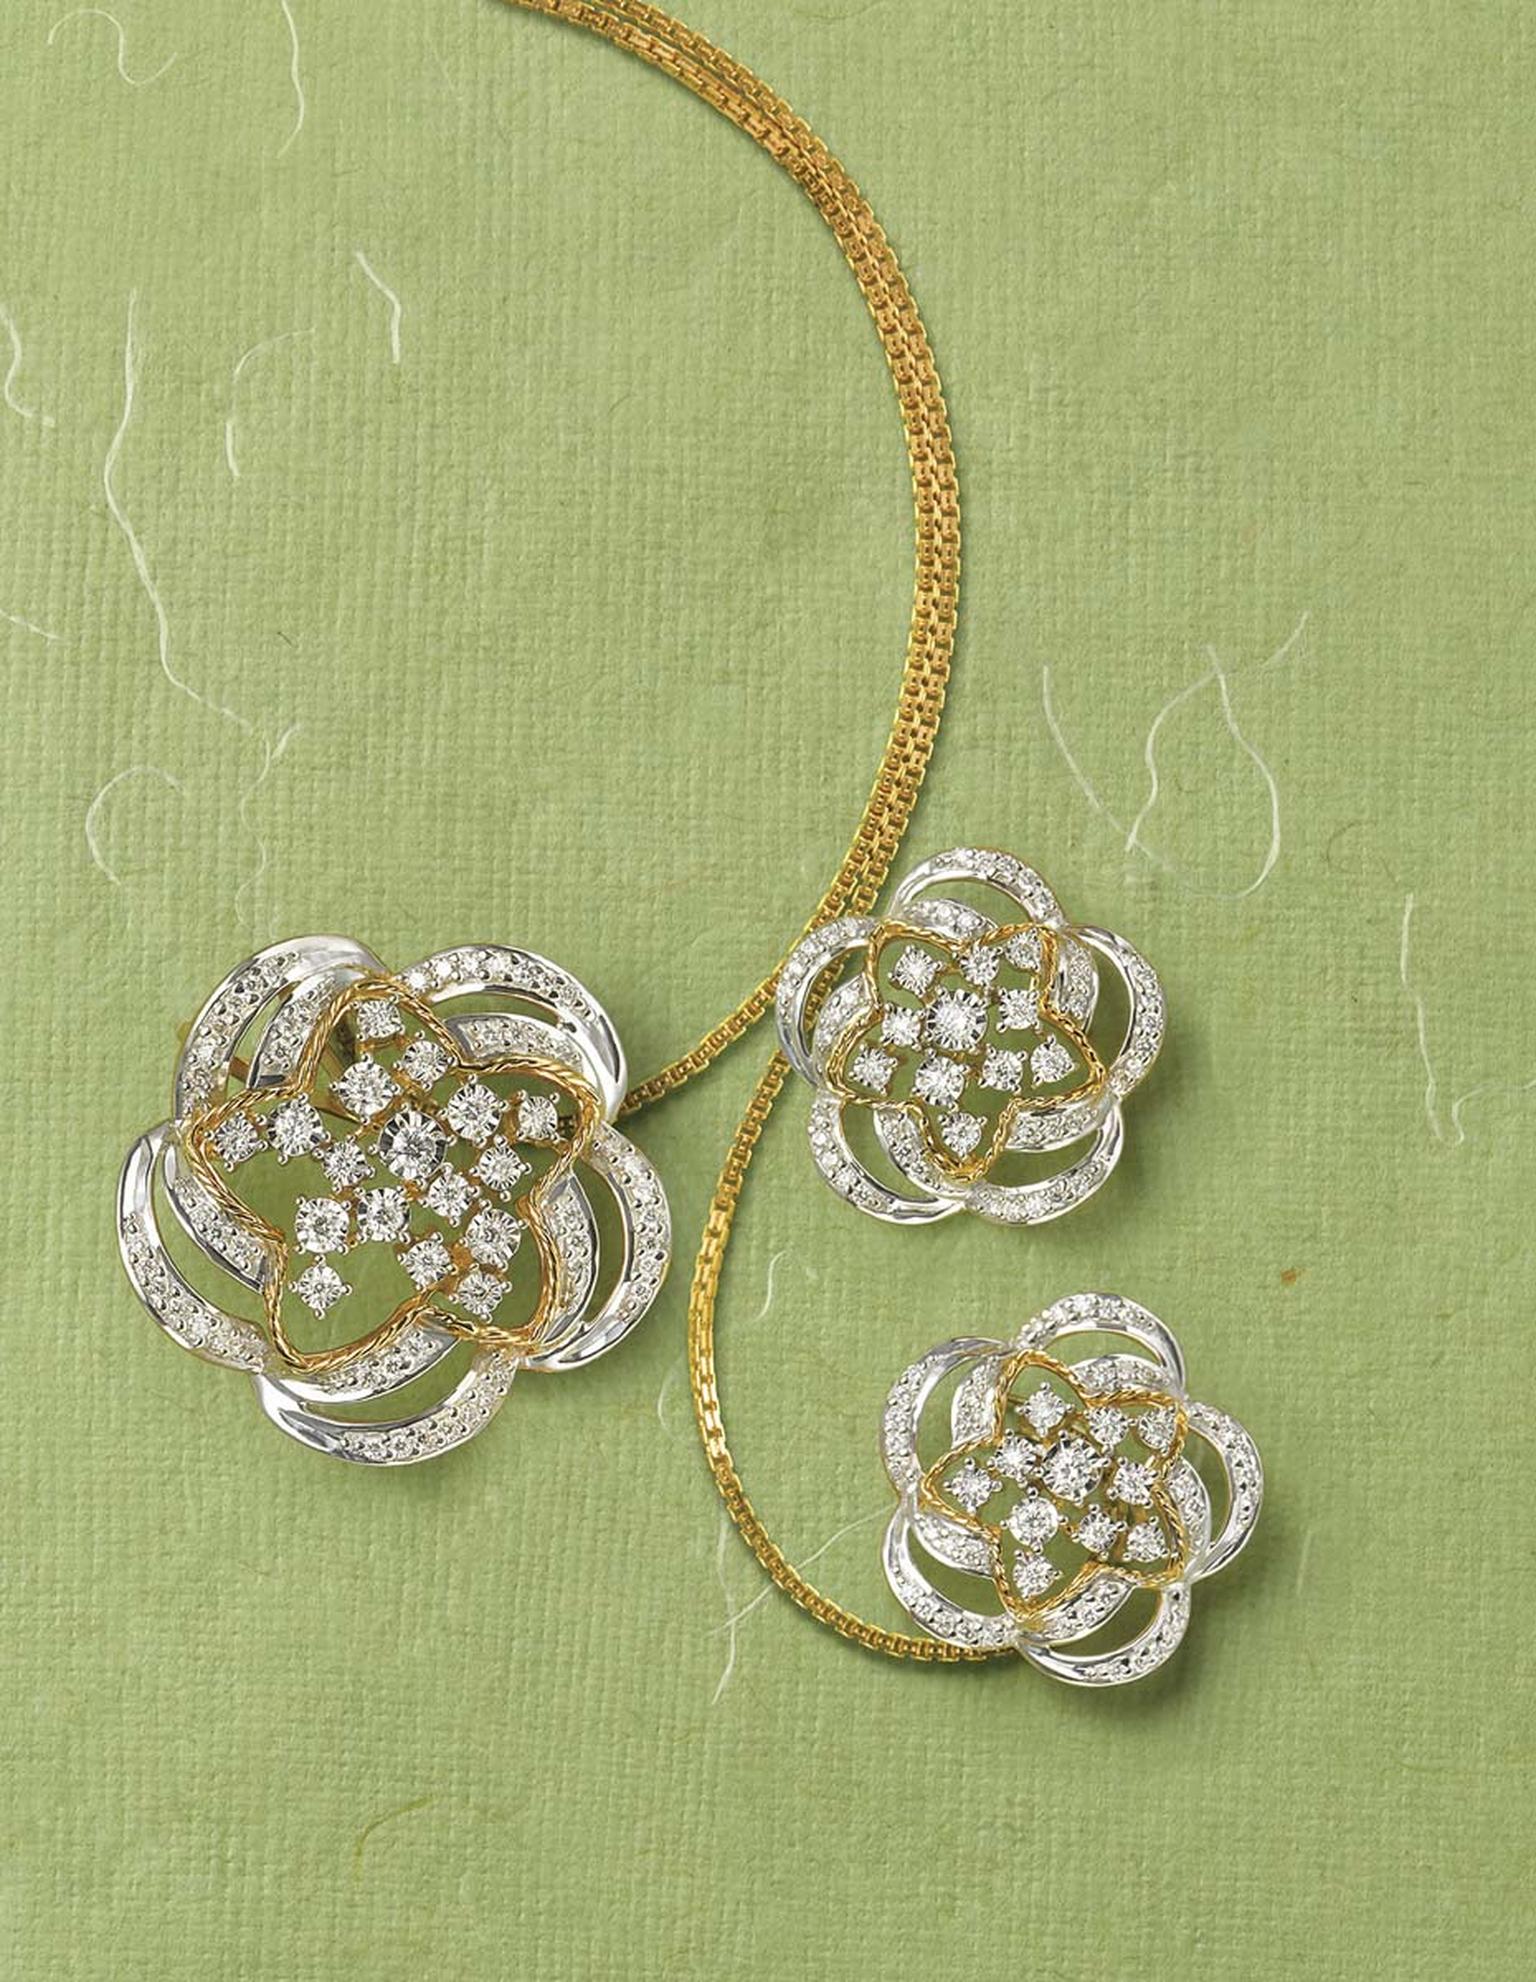 Tanishq Zyra collection white and yellow gold hydrangea earrings and necklace with white diamonds.